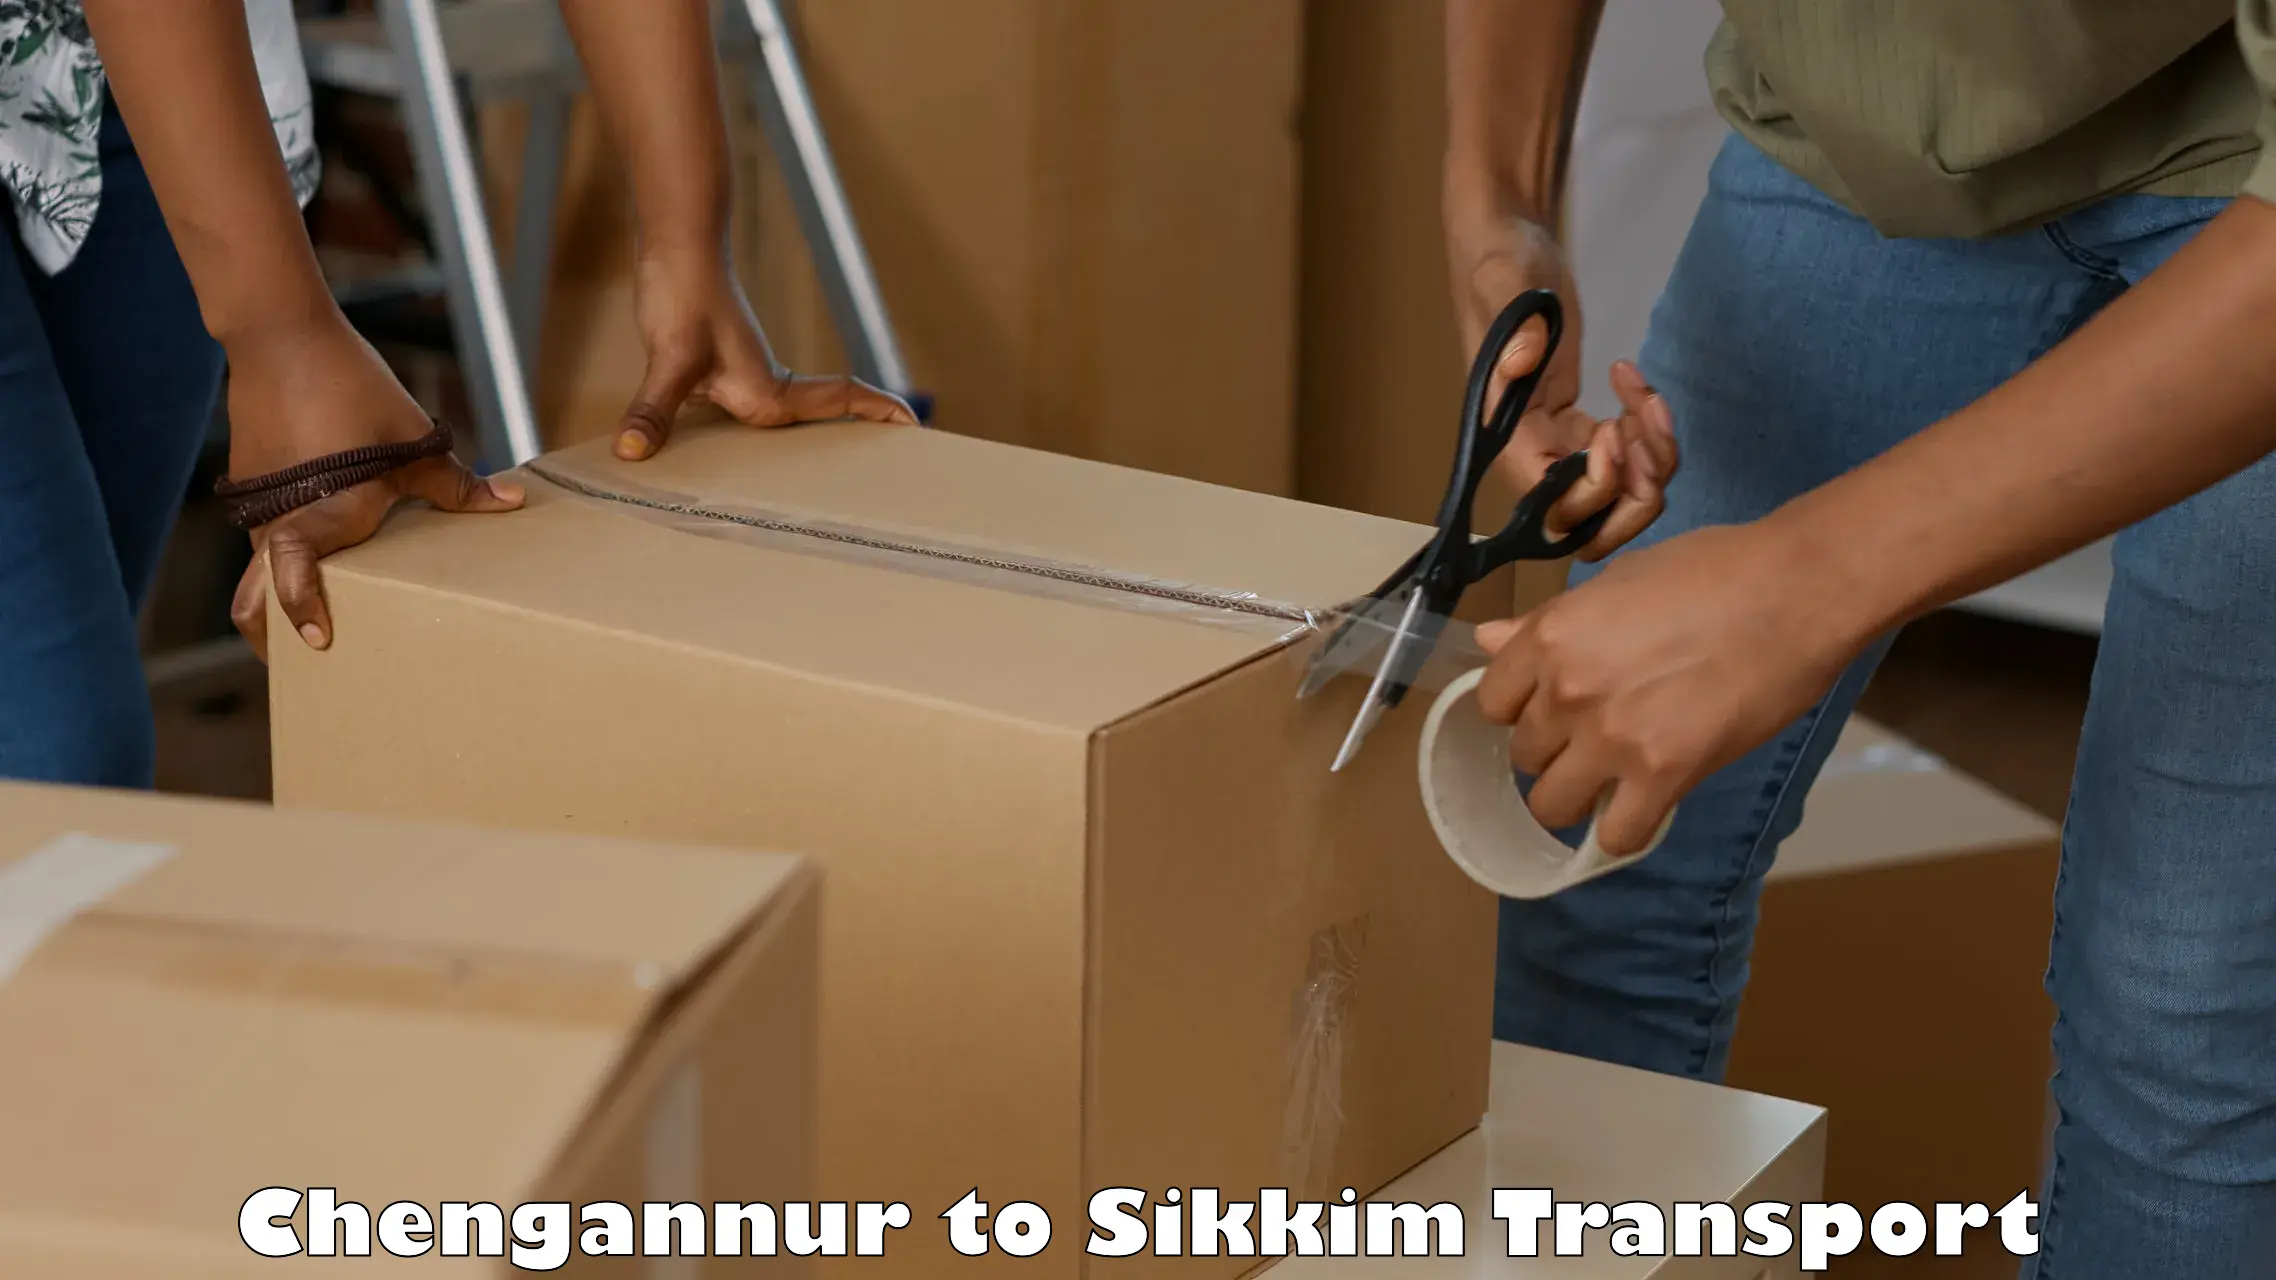 Goods delivery service Chengannur to Sikkim